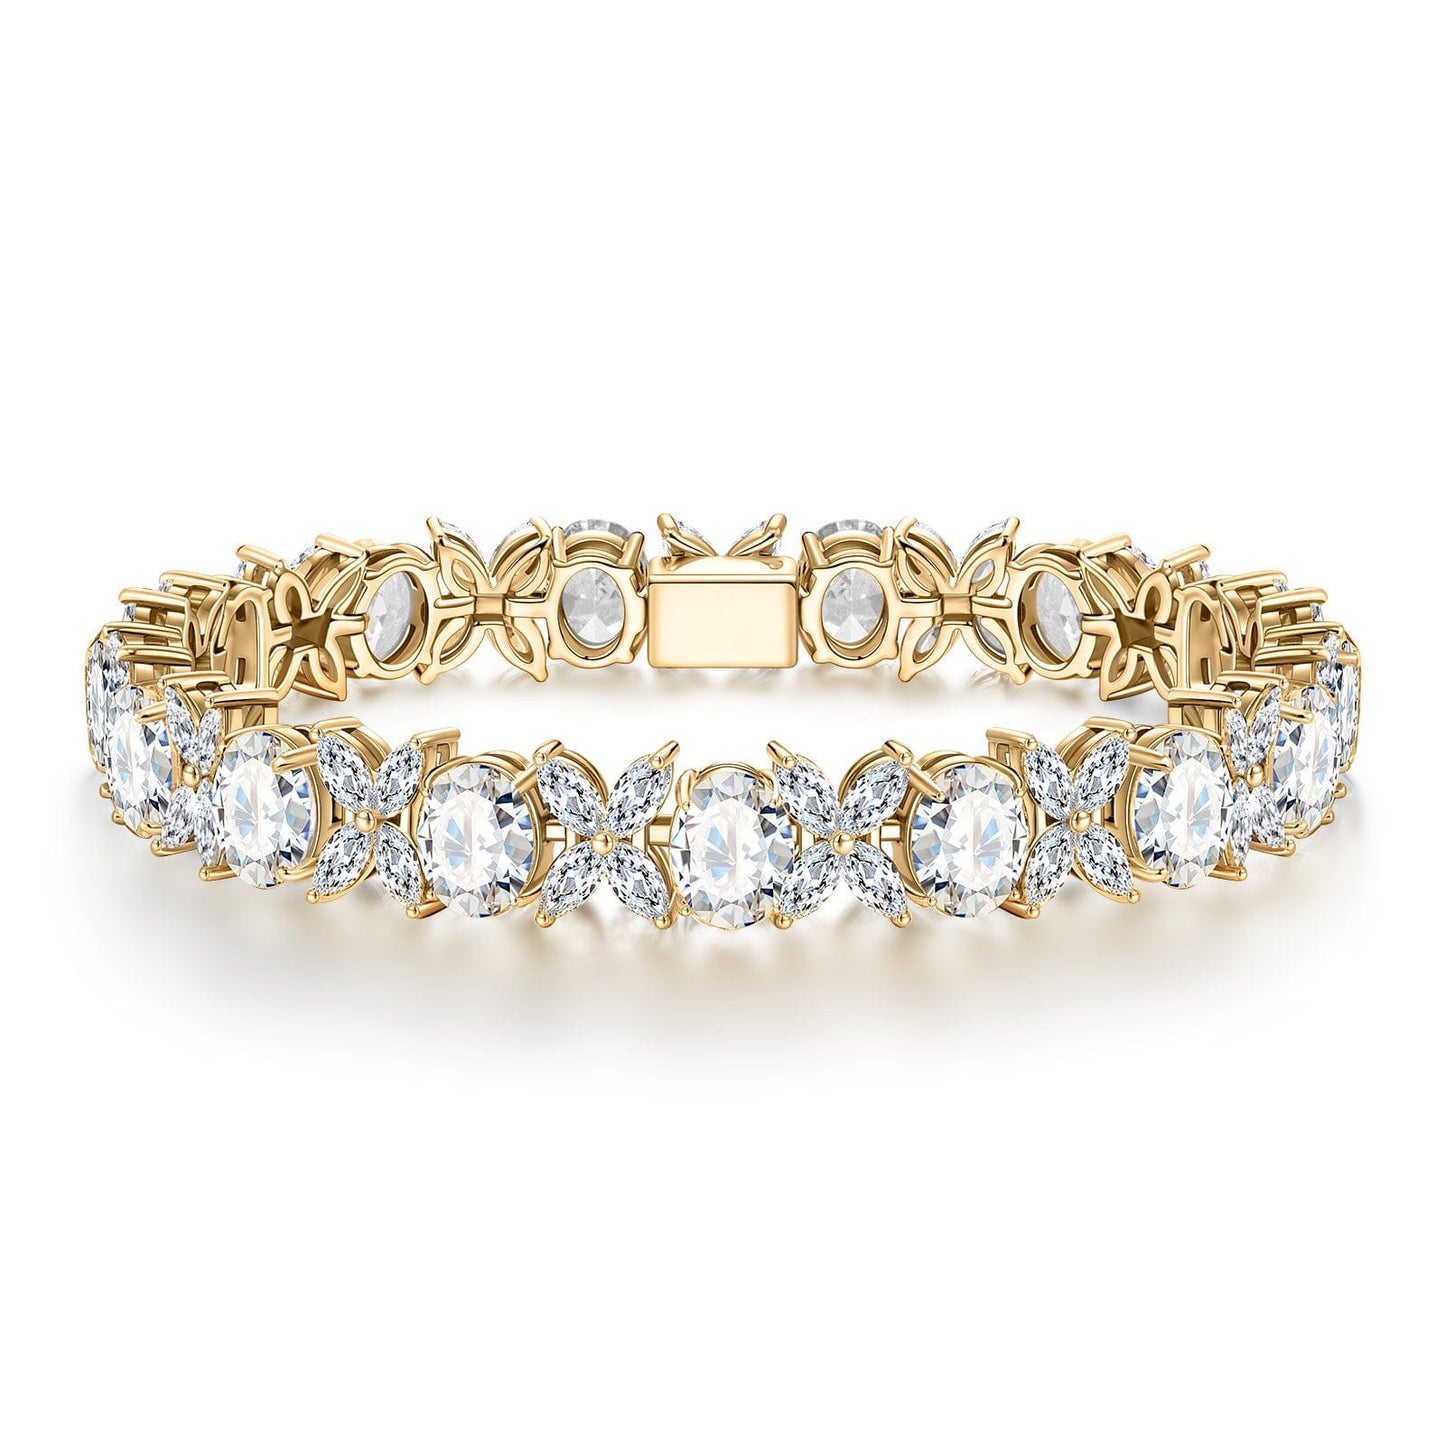 Amidst Petals of Clover Tarnish-resistant Silver Frost Flower Cut Cubic Zirconia Bracelet In 14K Gold Plated